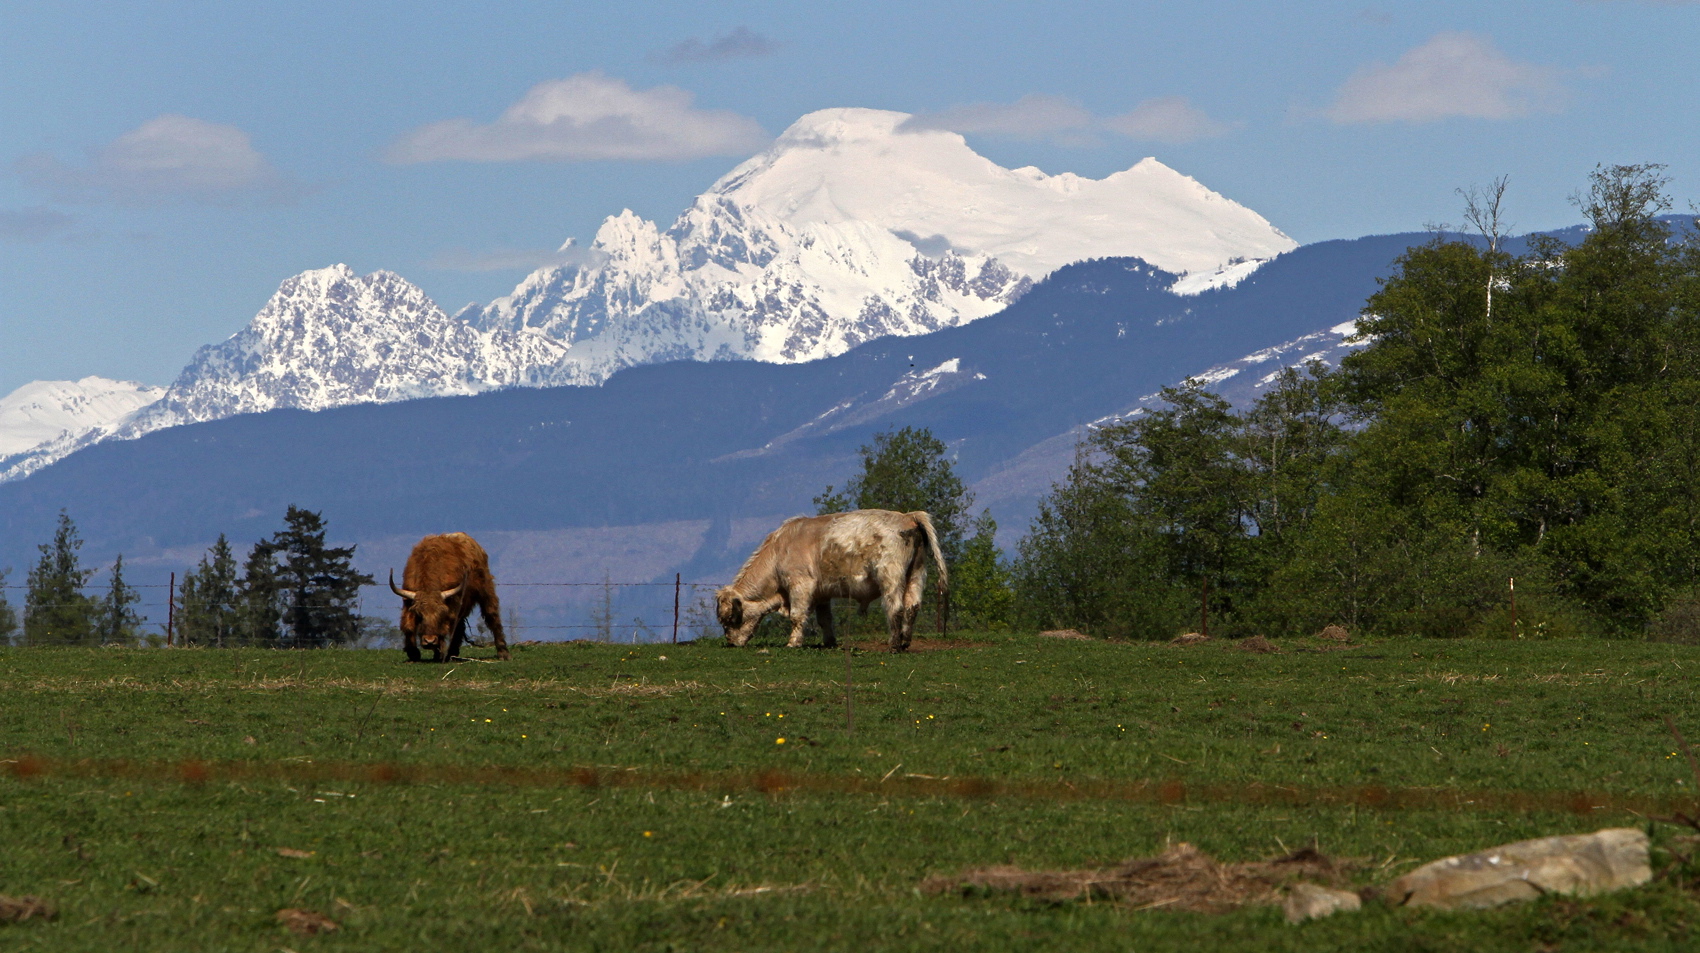 Scottish Highland cattle graze near the Upland Trail as Mount Baker rises in the background in Bay View.